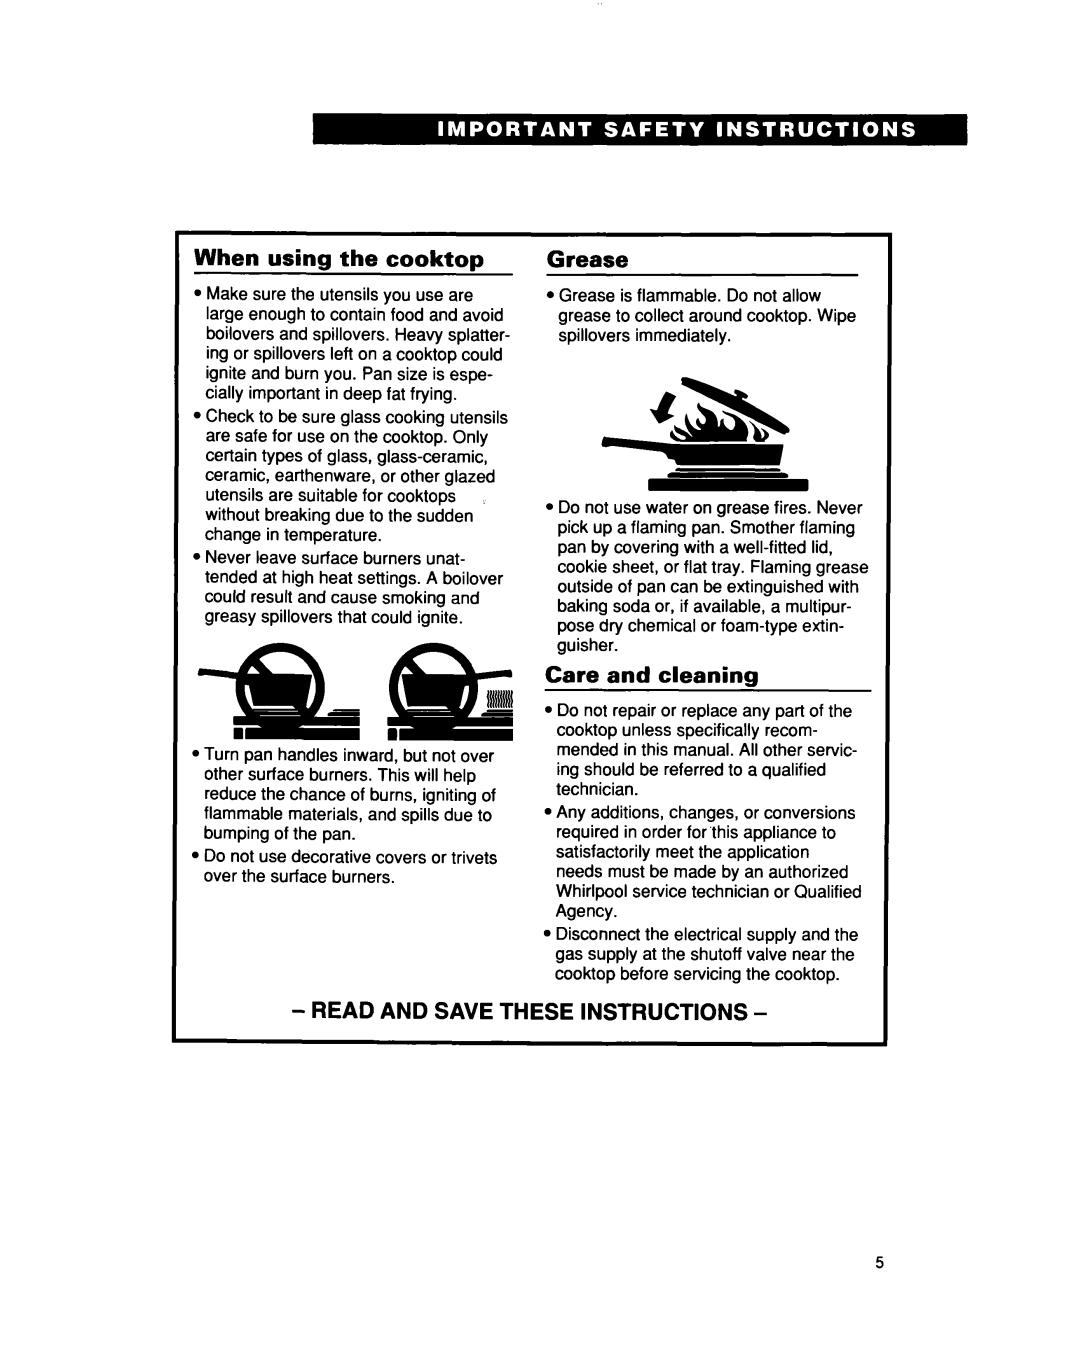 Whirlpool SC6640EE When using the cooktop, Grease, Care and cleaning, Read And Save These Instructions 